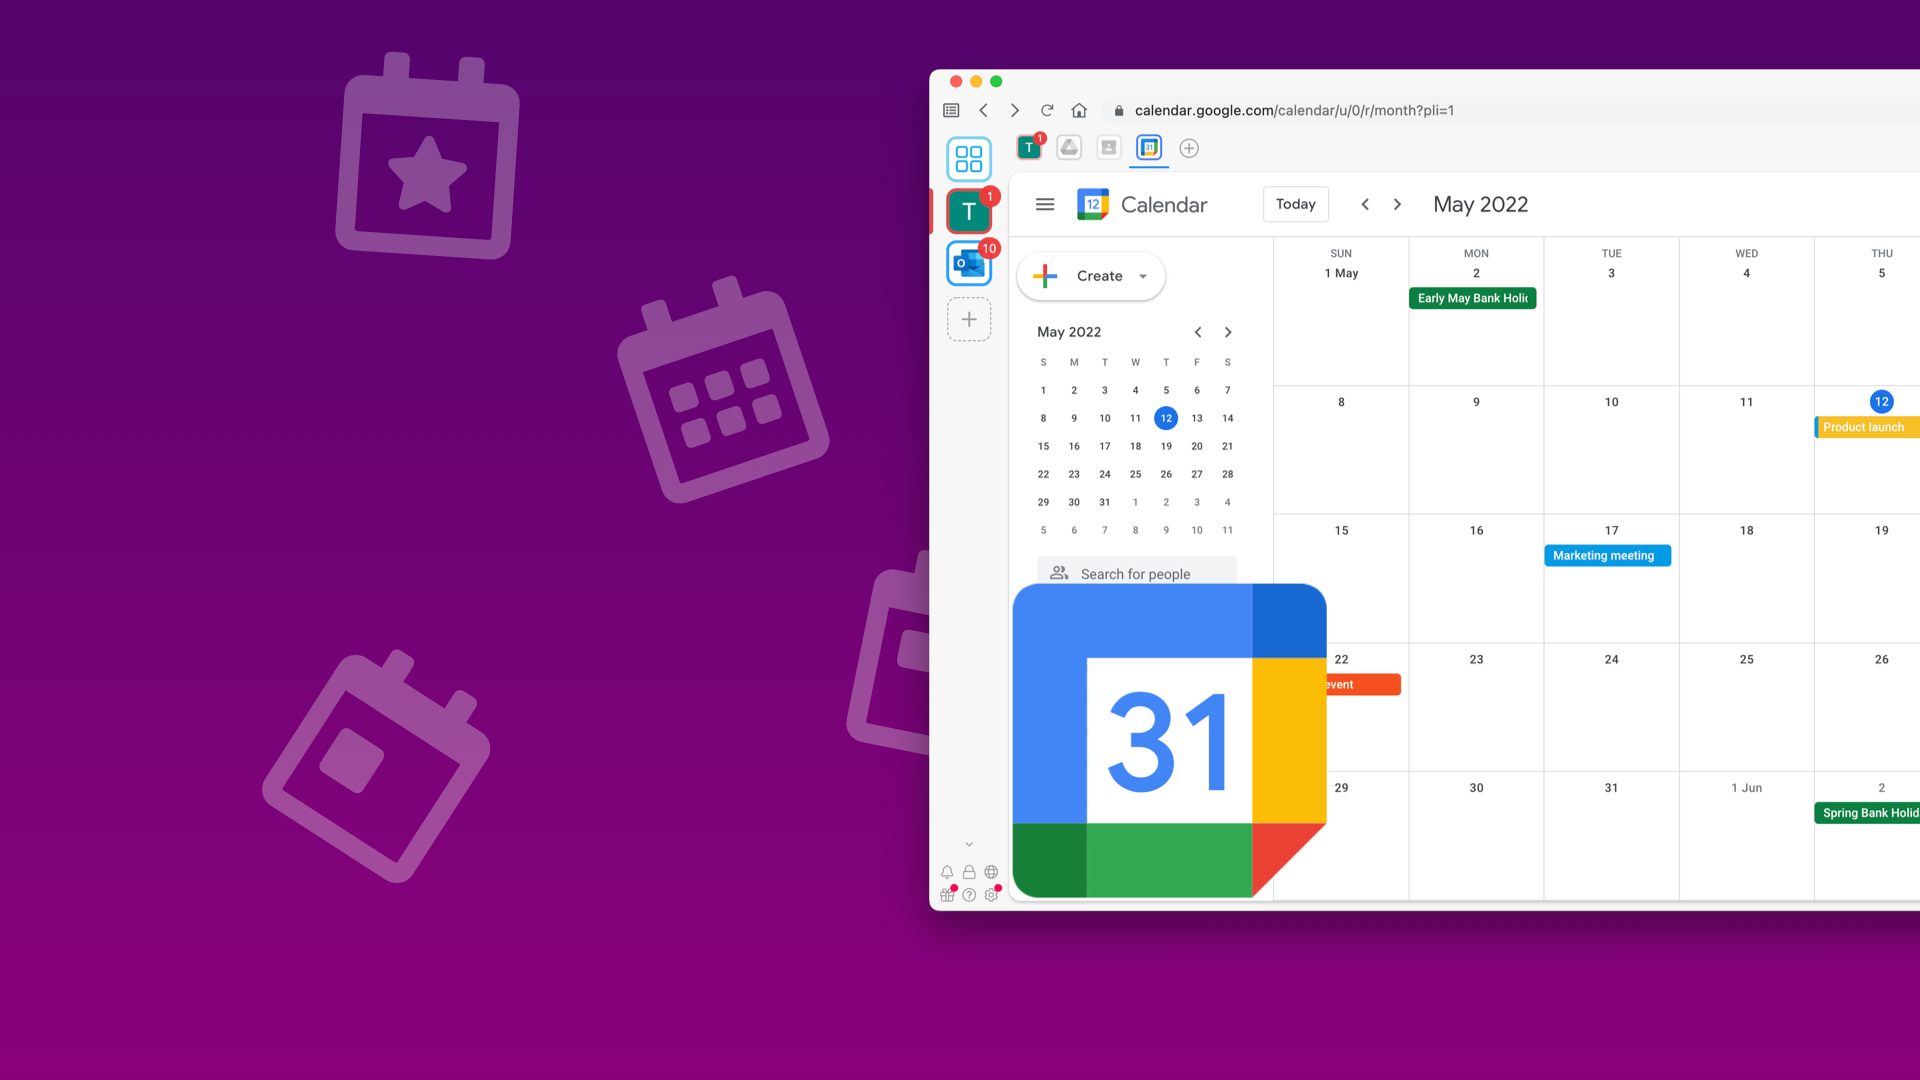 How To Check Other People'S Calendar In Google Calendar - Sandi Cordelie